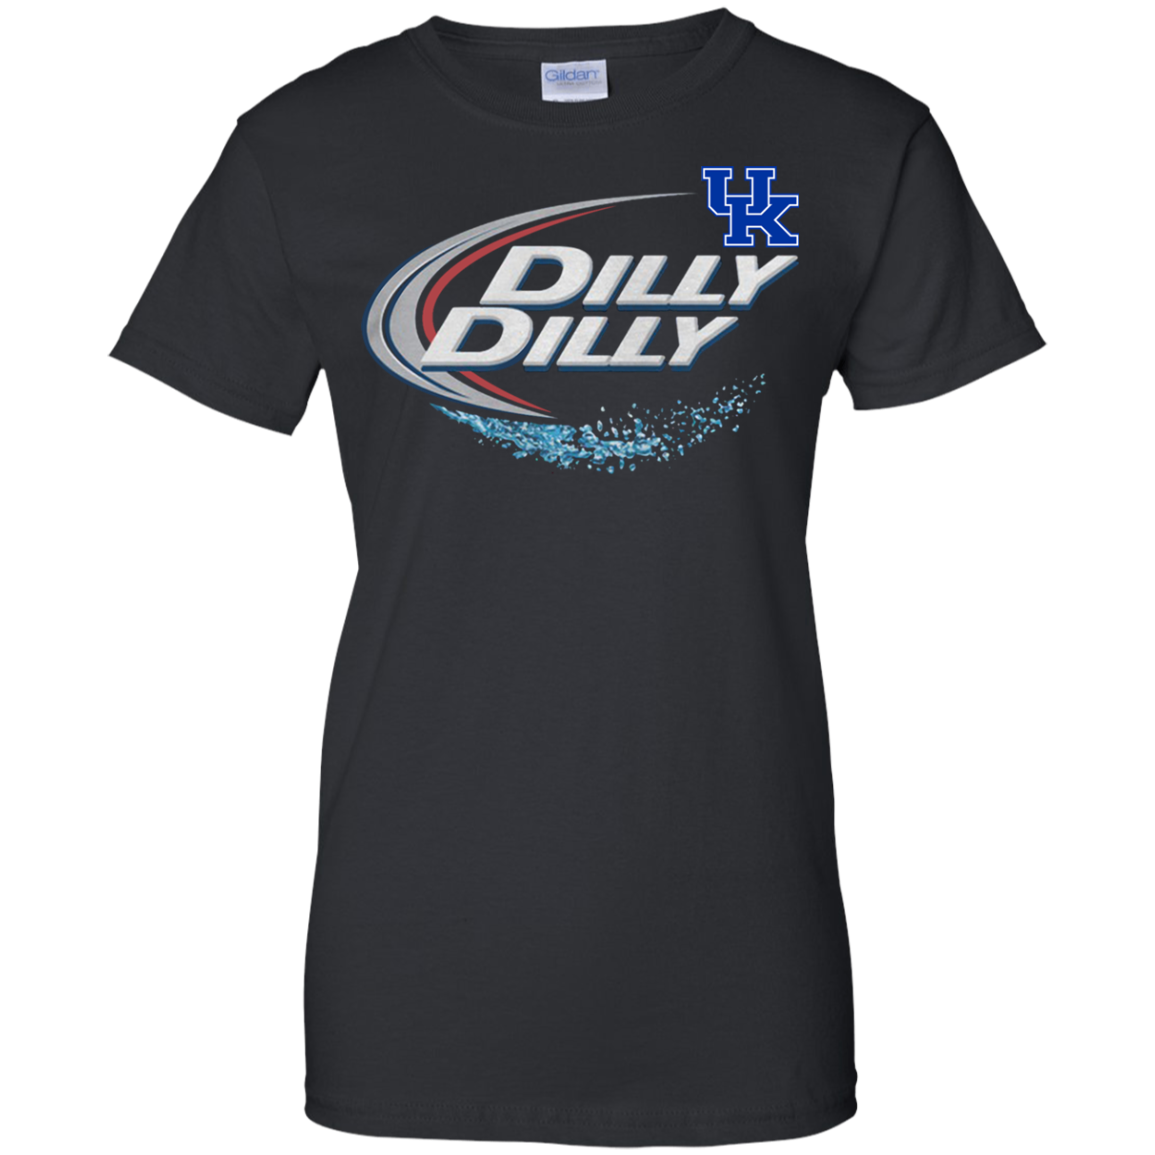 Get Here Kentucky Wildcats Dilly Dilly Shirt - Tula Store